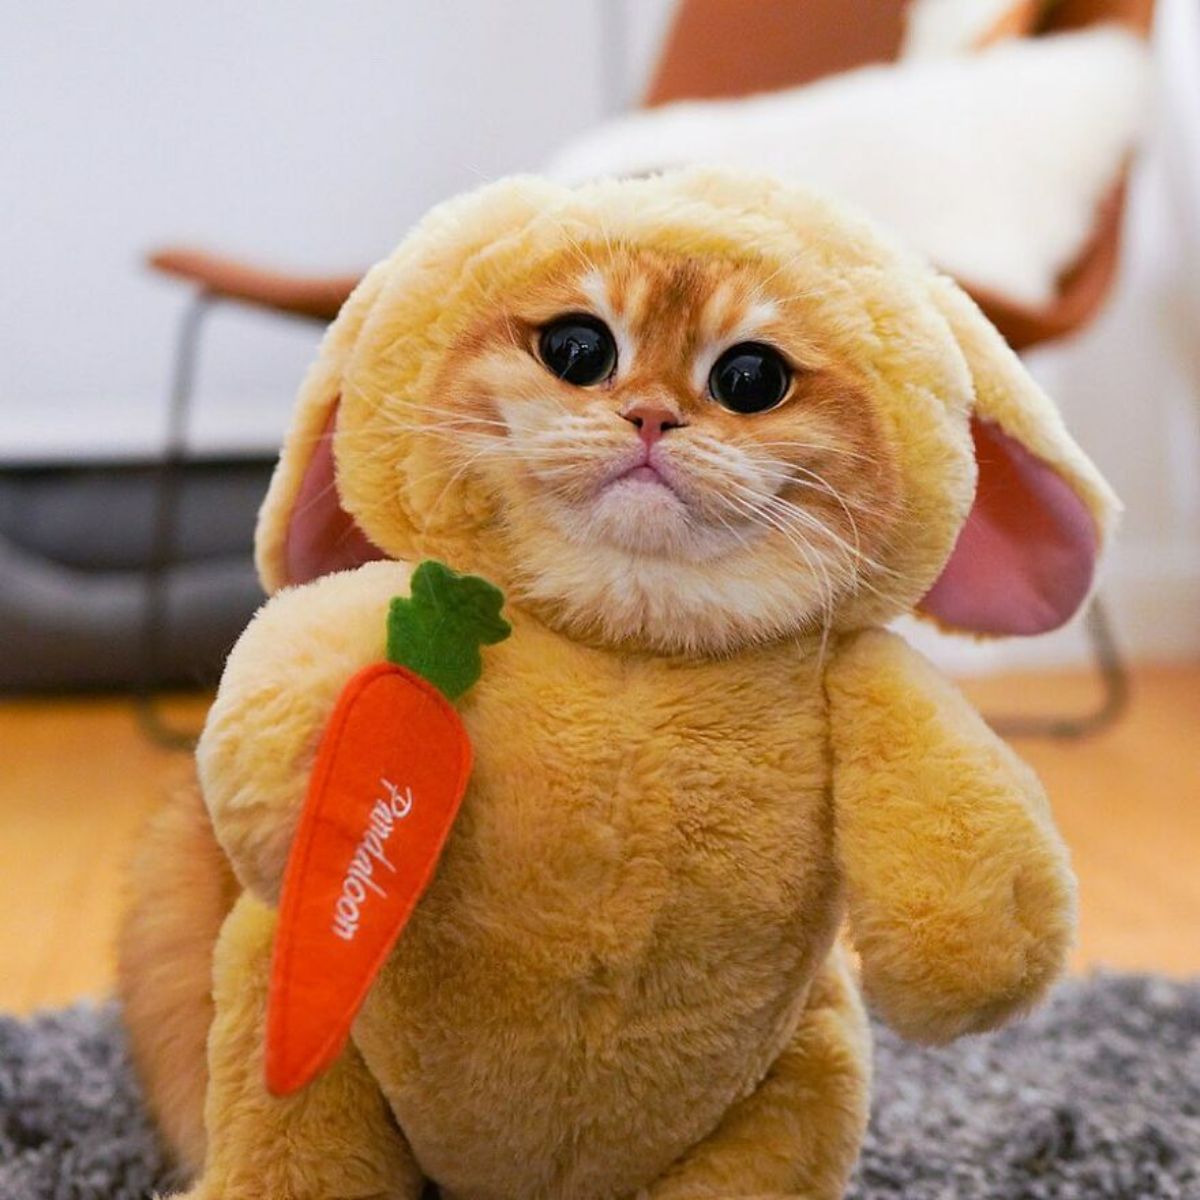 orange cat with large black eyes wearing a yellow rabbit costume with an orange carrot on the costume